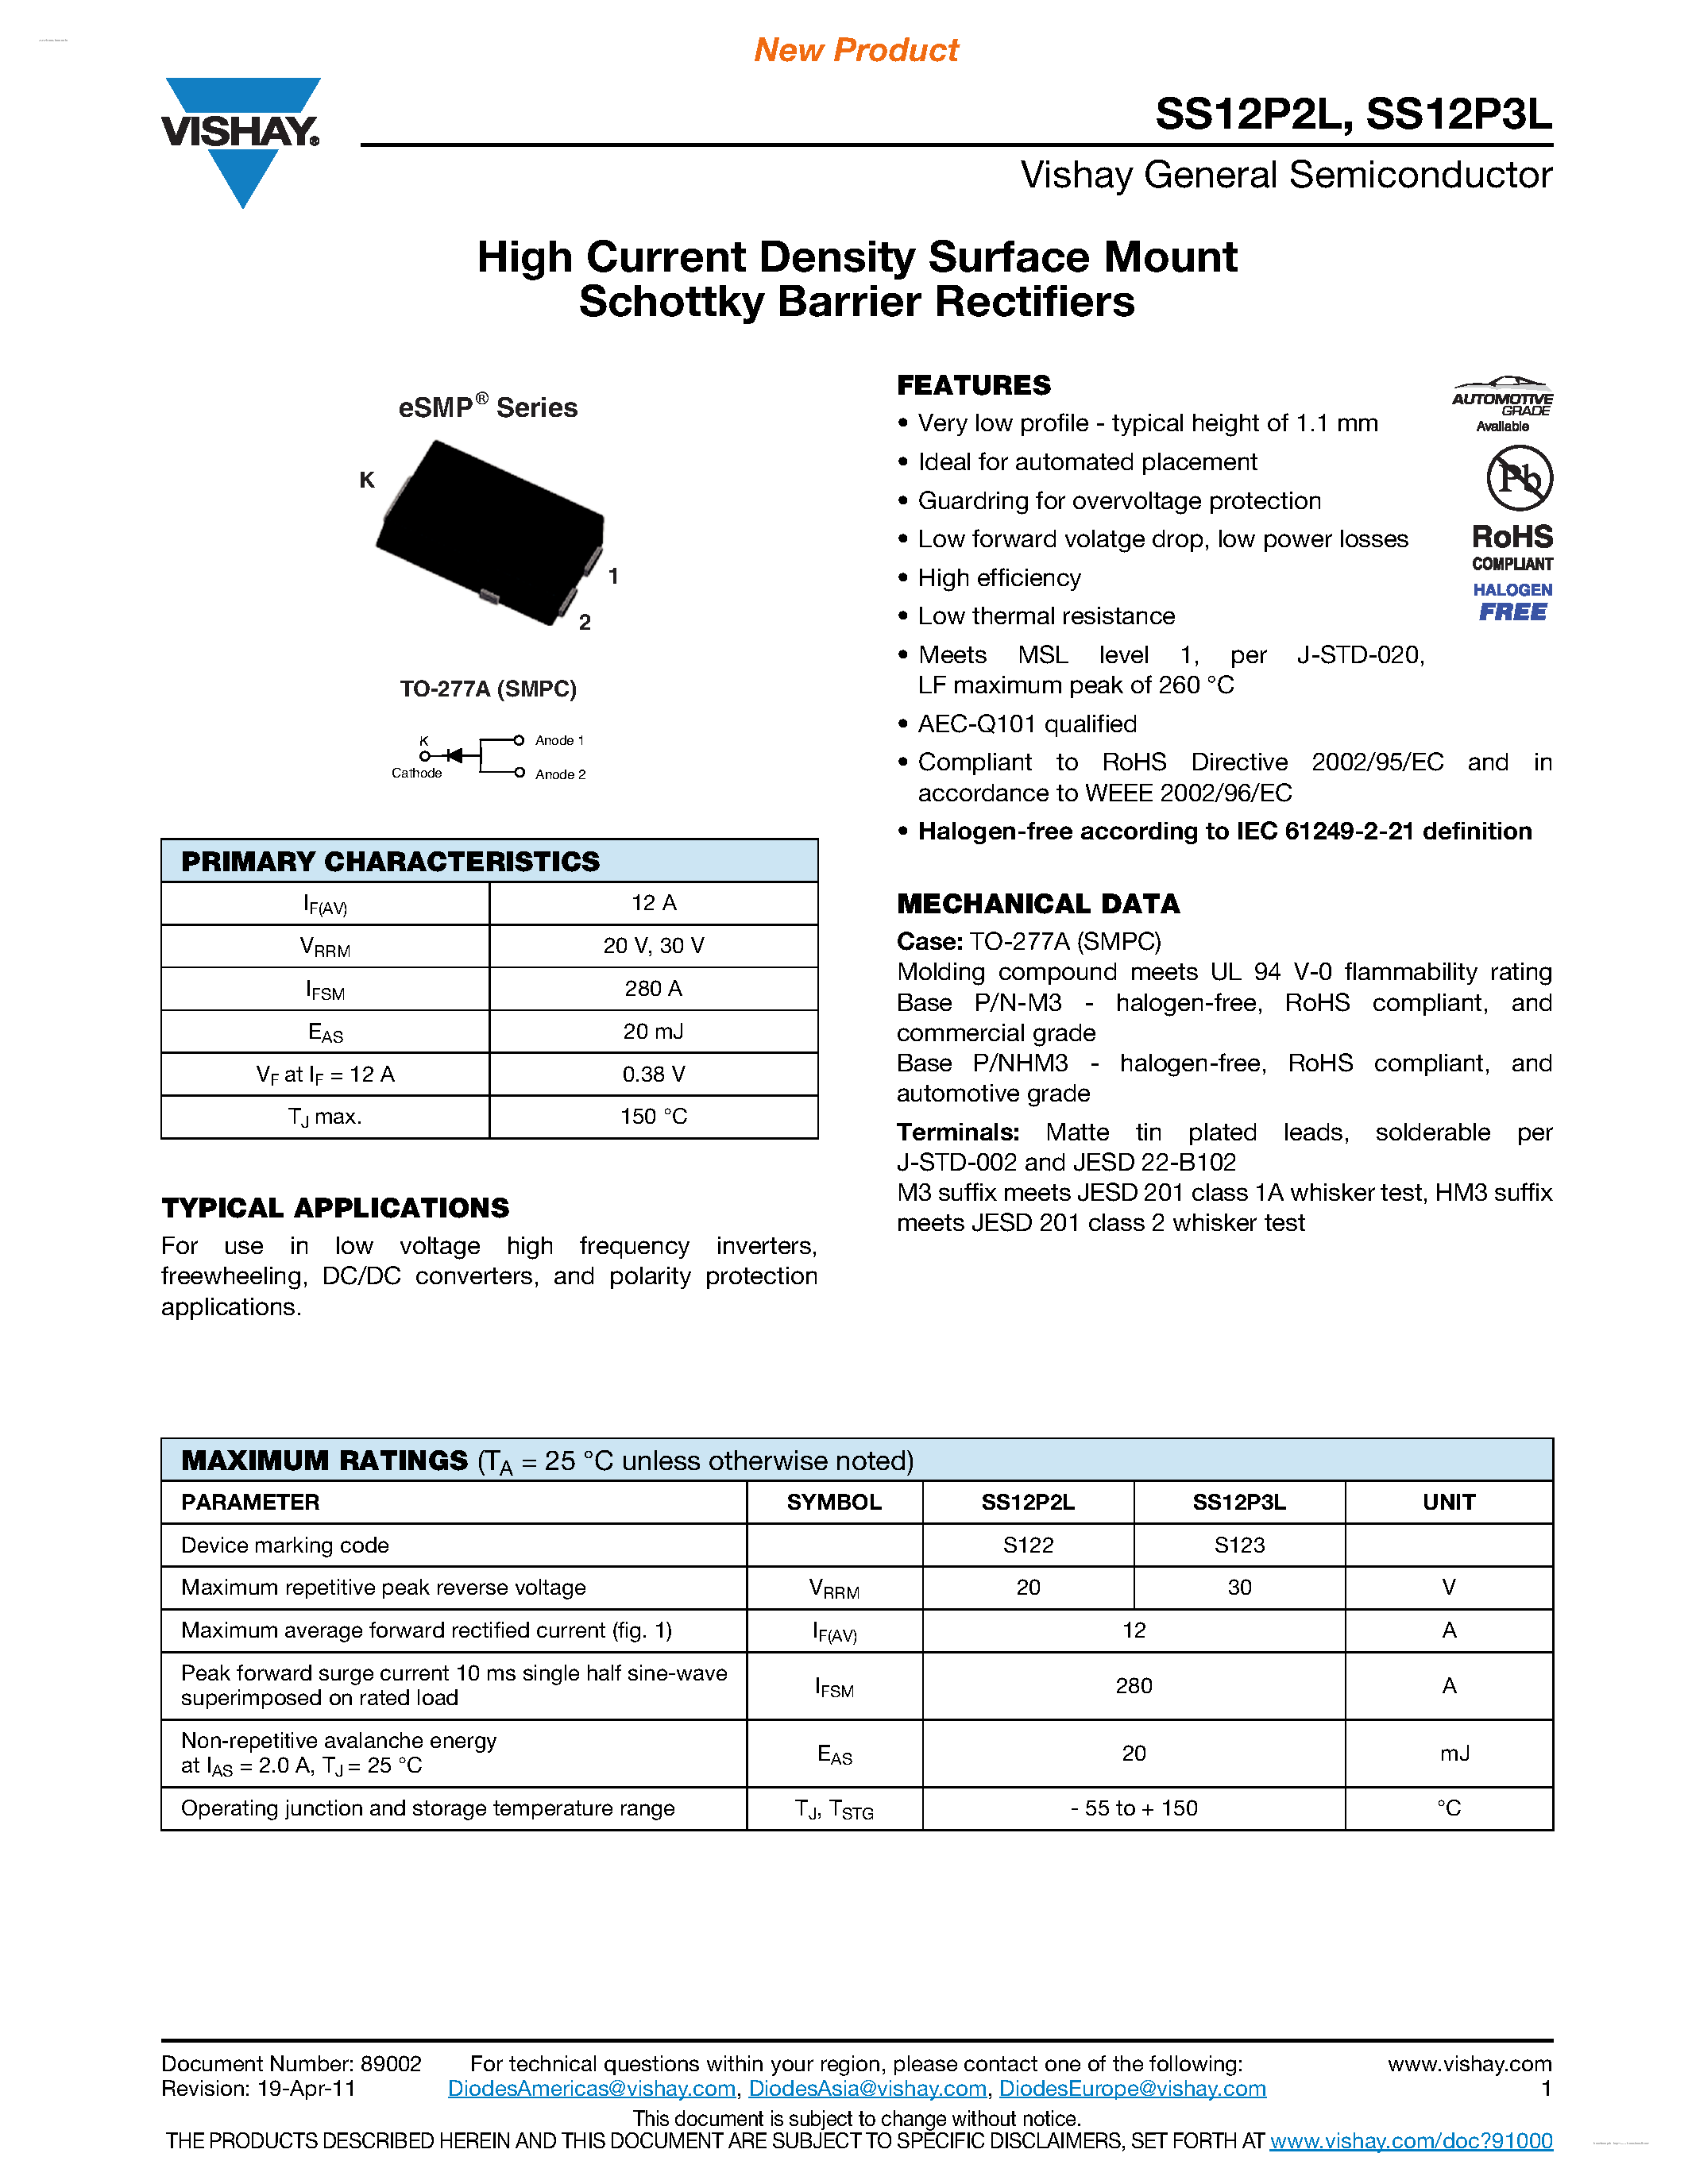 Даташит SS12P2L - (SS12P2L / SS12P3L) High Current Density Surface Mount Schottky Barrier Rectifiers страница 1